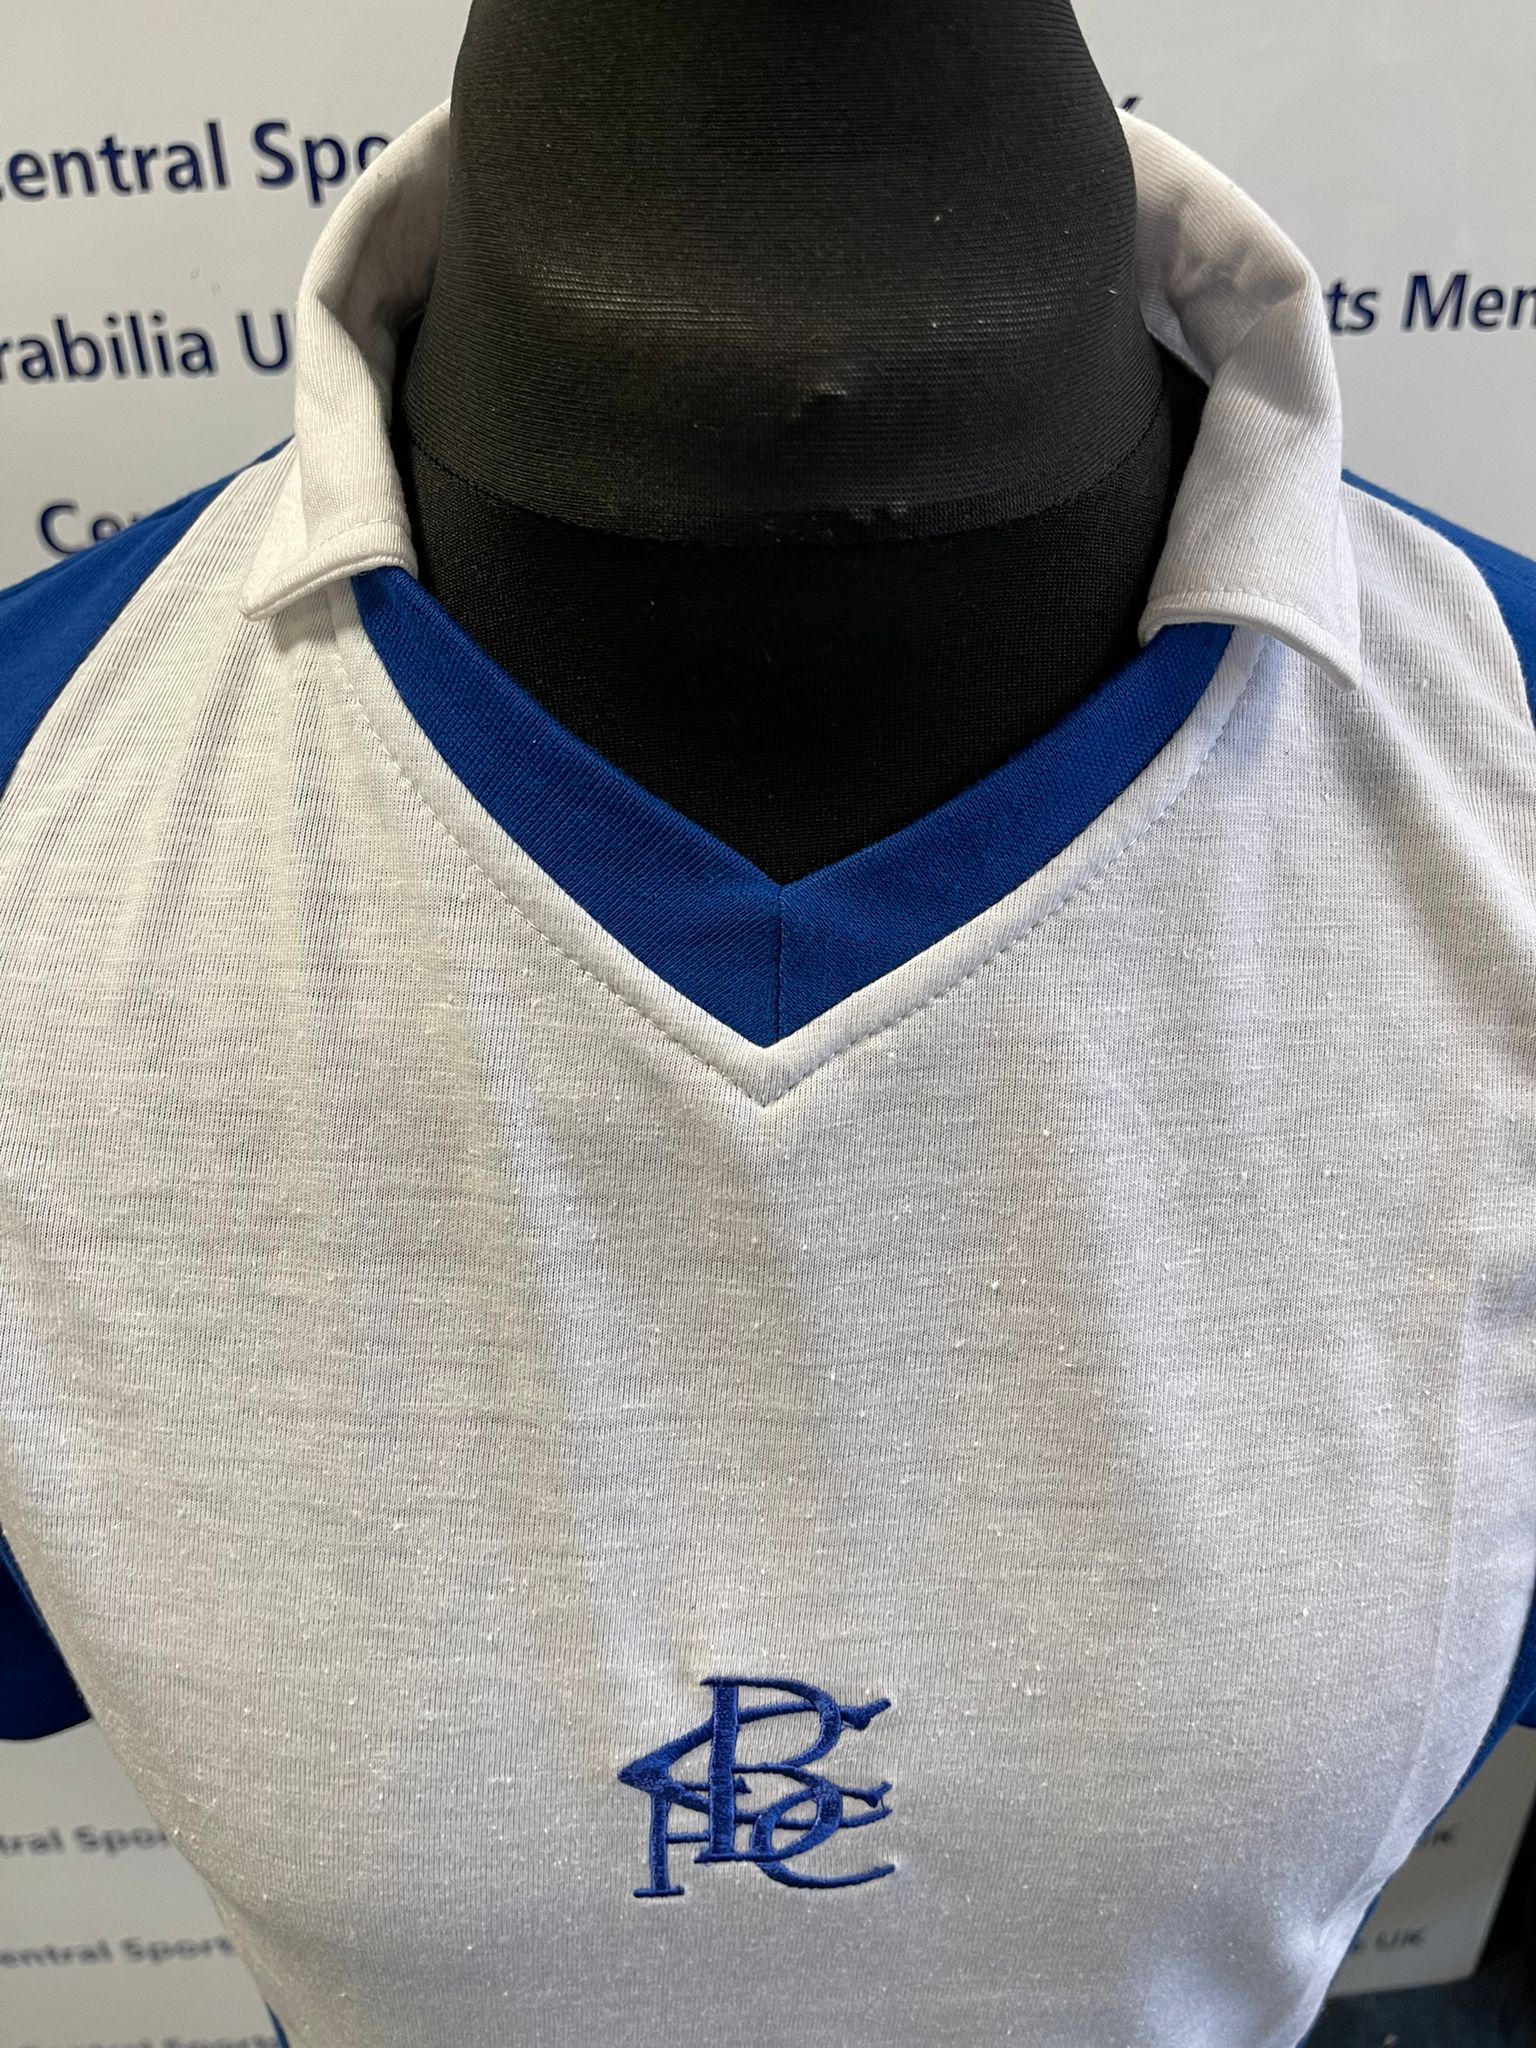 * NEW* Birmingham City 1975-1976 Replica Short Sleeve Shirt - ALL ADULT SIZES FROM SMALL TO 4XL!